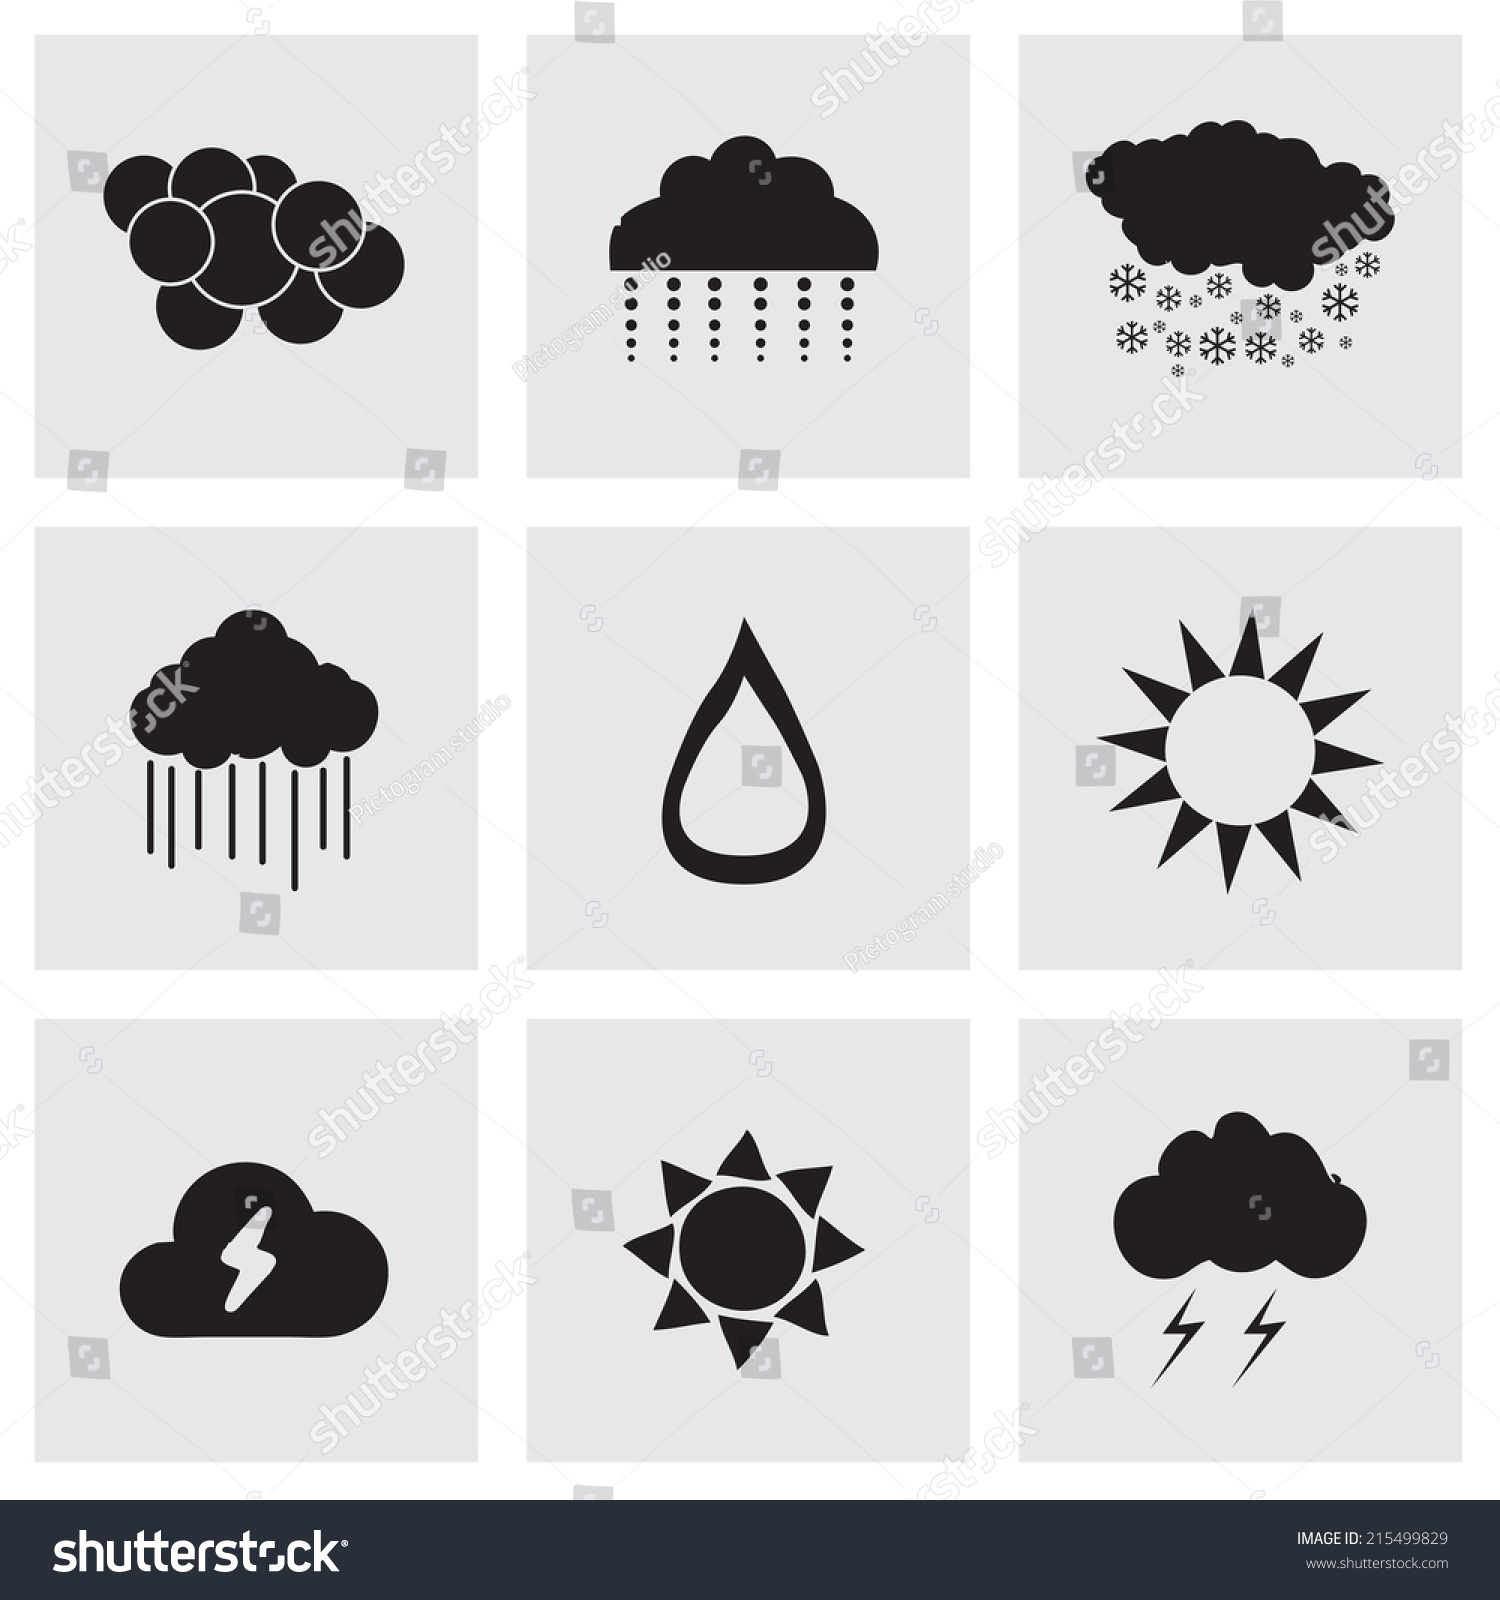 Vector Black Weather Icons Set On Stock Vector (Royalty Free) 215499829